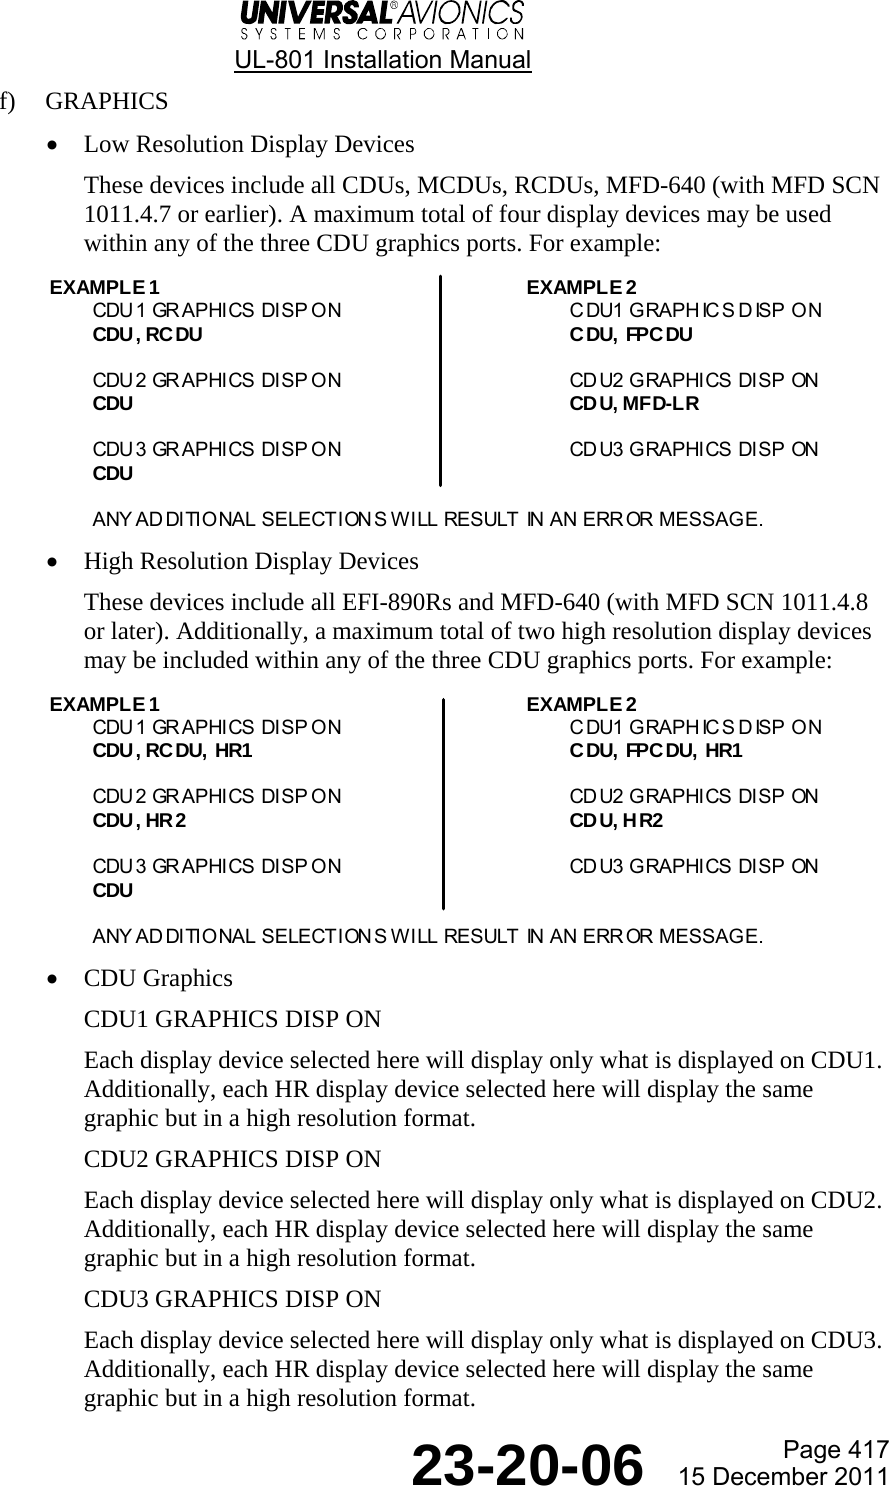  UL-801 Installation Manual  Page 417  23-20-06  15 December 2011 f) GRAPHICS • Low Resolution Display Devices These devices include all CDUs, MCDUs, RCDUs, MFD-640 (with MFD SCN 1011.4.7 or earlier). A maximum total of four display devices may be used within any of the three CDU graphics ports. For example:  • High Resolution Display Devices These devices include all EFI-890Rs and MFD-640 (with MFD SCN 1011.4.8 or later). Additionally, a maximum total of two high resolution display devices may be included within any of the three CDU graphics ports. For example:  • CDU Graphics CDU1 GRAPHICS DISP ON Each display device selected here will display only what is displayed on CDU1. Additionally, each HR display device selected here will display the same graphic but in a high resolution format. CDU2 GRAPHICS DISP ON Each display device selected here will display only what is displayed on CDU2. Additionally, each HR display device selected here will display the same graphic but in a high resolution format. CDU3 GRAPHICS DISP ON Each display device selected here will display only what is displayed on CDU3. Additionally, each HR display device selected here will display the same graphic but in a high resolution format. EXAMPLE 1 EXAMPLE 2CDU1 GRAPHICS DISP ON CDU1 GRAPH ICS DISP ONCDU, RCDU CDU, FPC DUCDU2 GRAPHICS DISP ON CD U2 GRAPHICS DISP ONCDU CD U, MFD-LRCDU3 GRAPHICS DISP ON CD U3 GRAPHICS DISP ONCDUANY AD DITIONAL SELECTION S WILL RESULT IN AN ERR OR  MESSAGE.EXAMPLE 1 EXAMPLE 2CDU1 GRAPHICS DISP ON CDU1 GRAPH ICS DISP ONCDU, RCDU, HR1 CDU, FPC DU, HR1CDU2 GRAPHICS DISP ON CD U2 GRAPHICS DISP ONCDU, HR2 CD U, H R2CDU3 GRAPHICS DISP ON CD U3 GRAPHICS DISP ONCDUANY AD DITIONAL SELECTION S WILL RESULT IN AN ERR OR  MESSAGE.